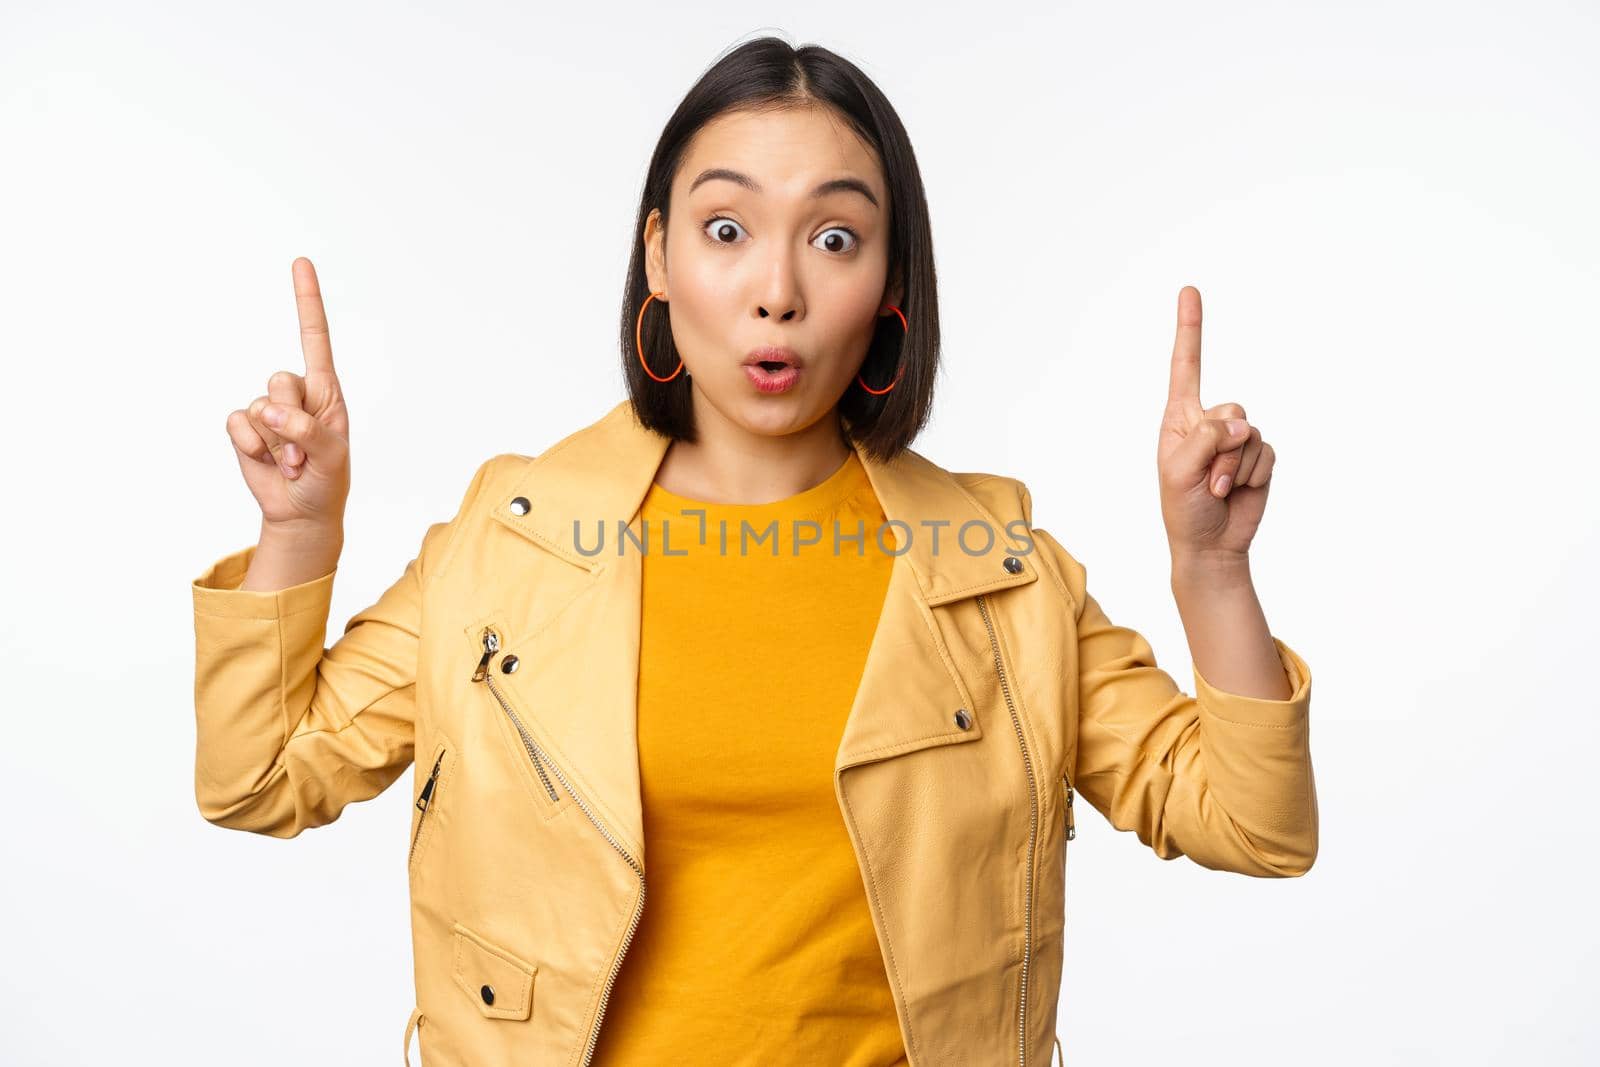 Surprised asian girl pointing fingers up, express interest, showing advertisement ahead, demonstrating promo banner on top, standing against white background.